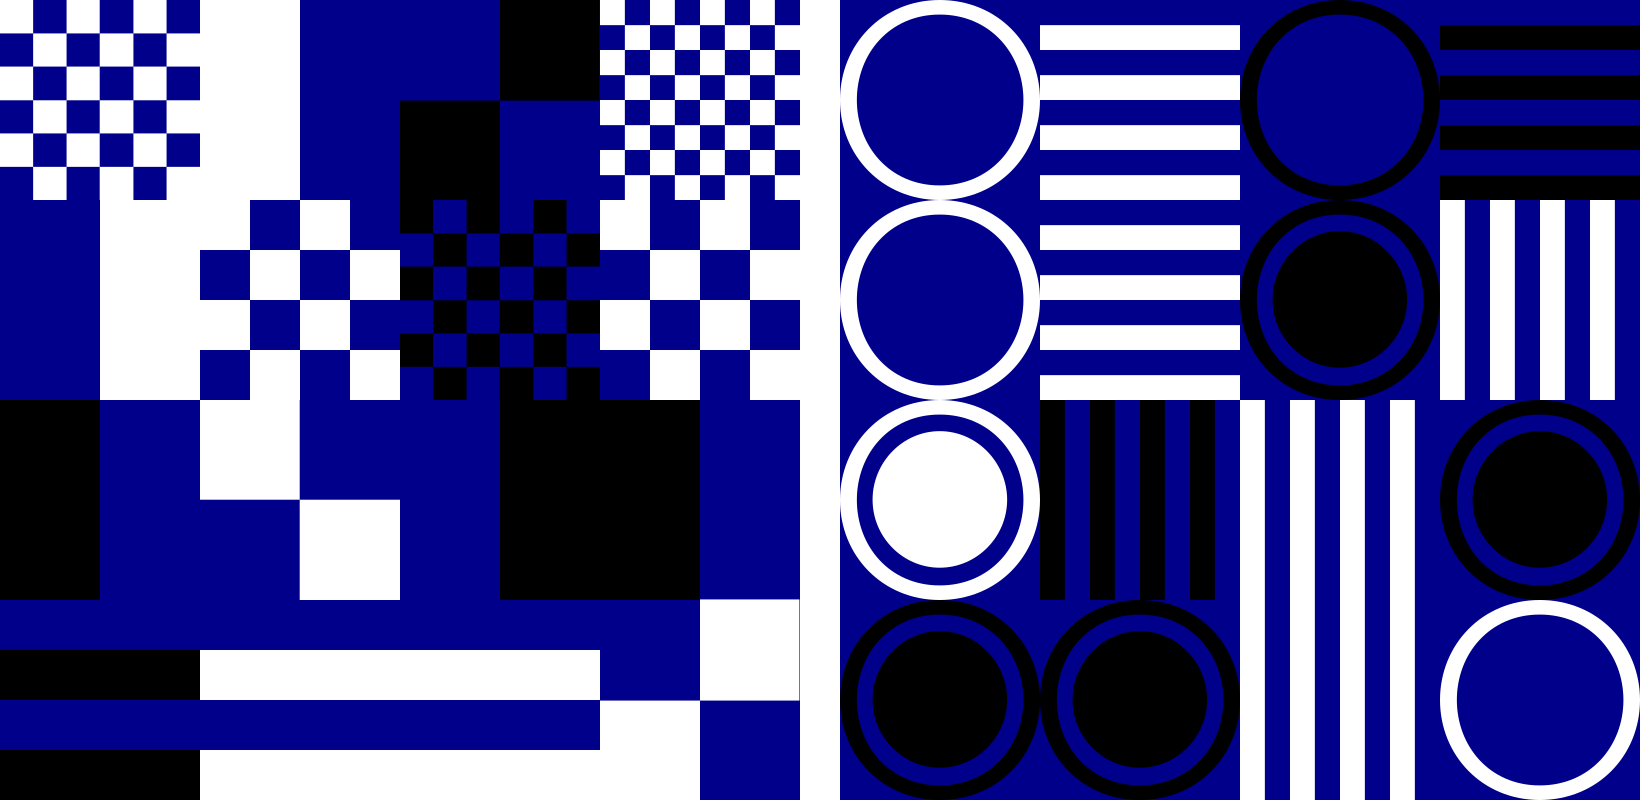 Cosmic Communications uses mainly lines, squares and circles from the typeface.